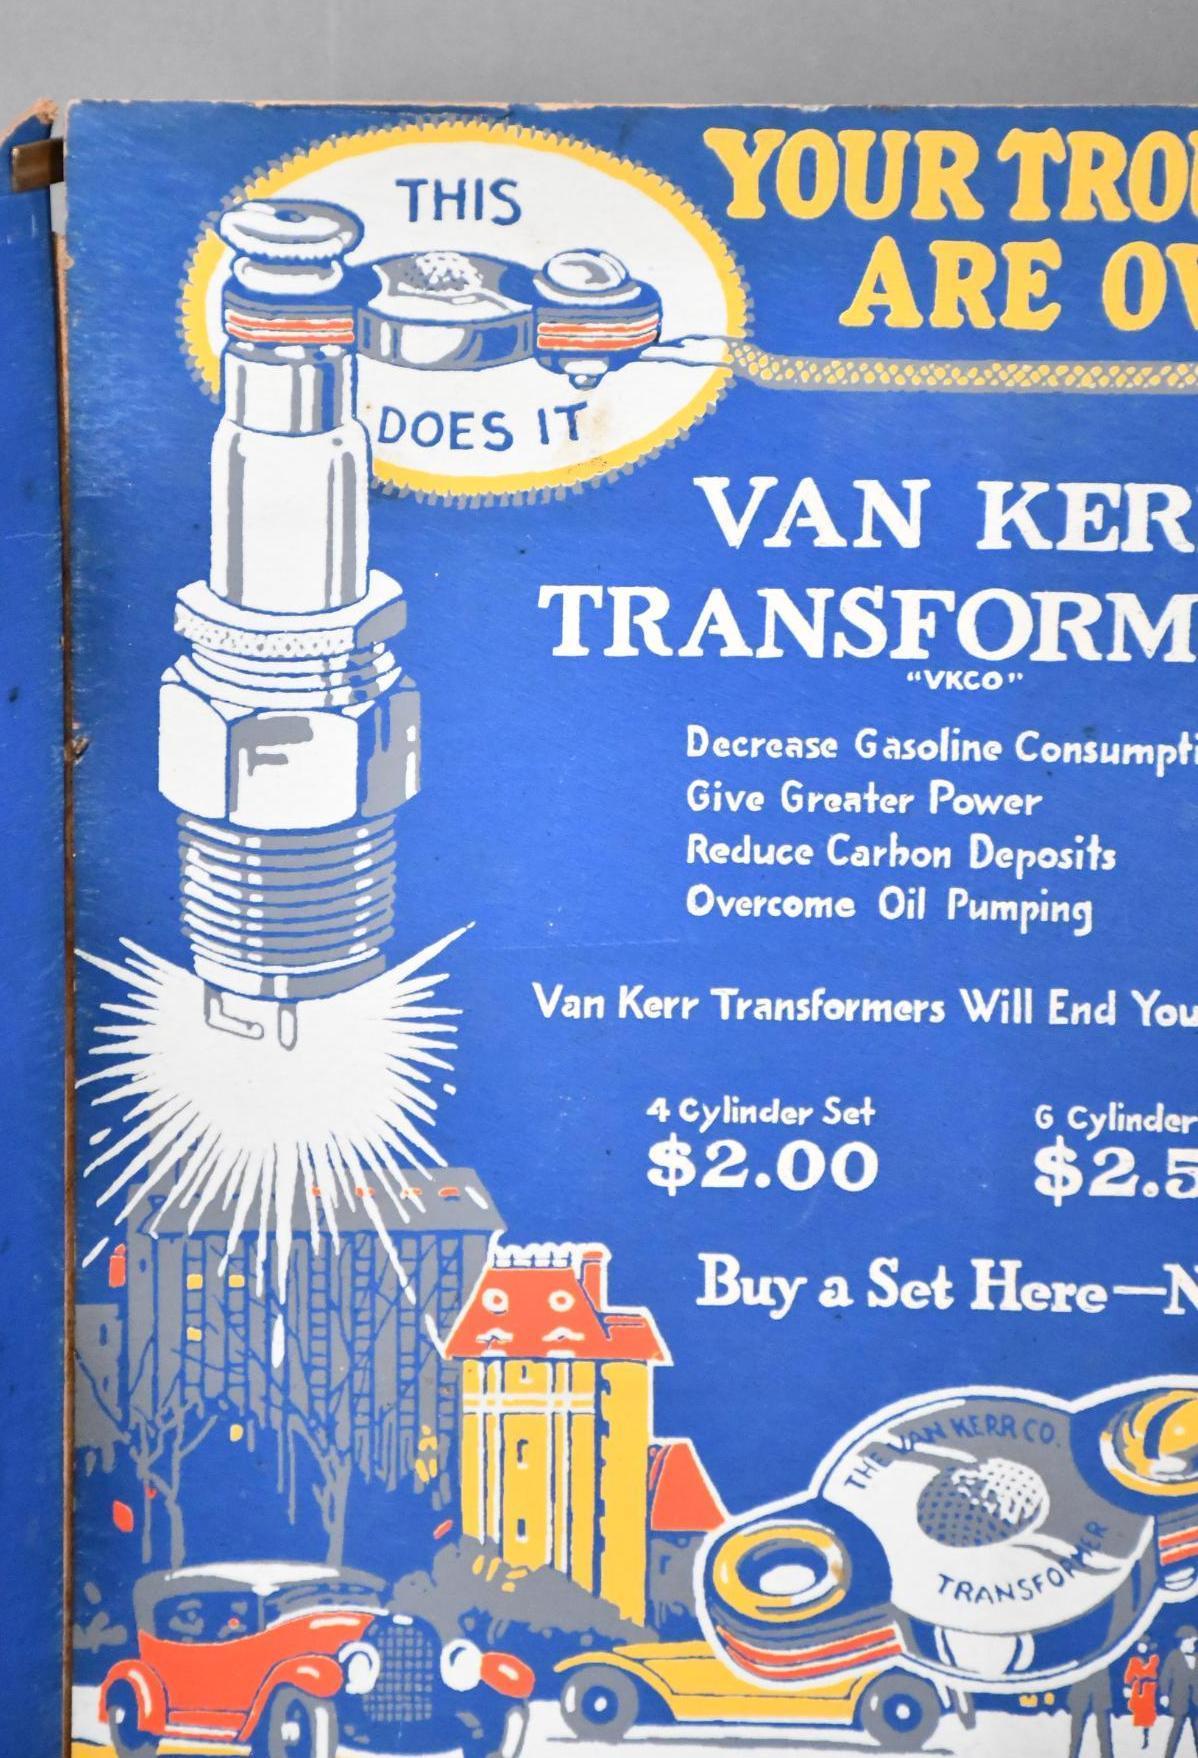 Van Kerr Transformers "Your Troubles are Over" Cardboard Counter Display